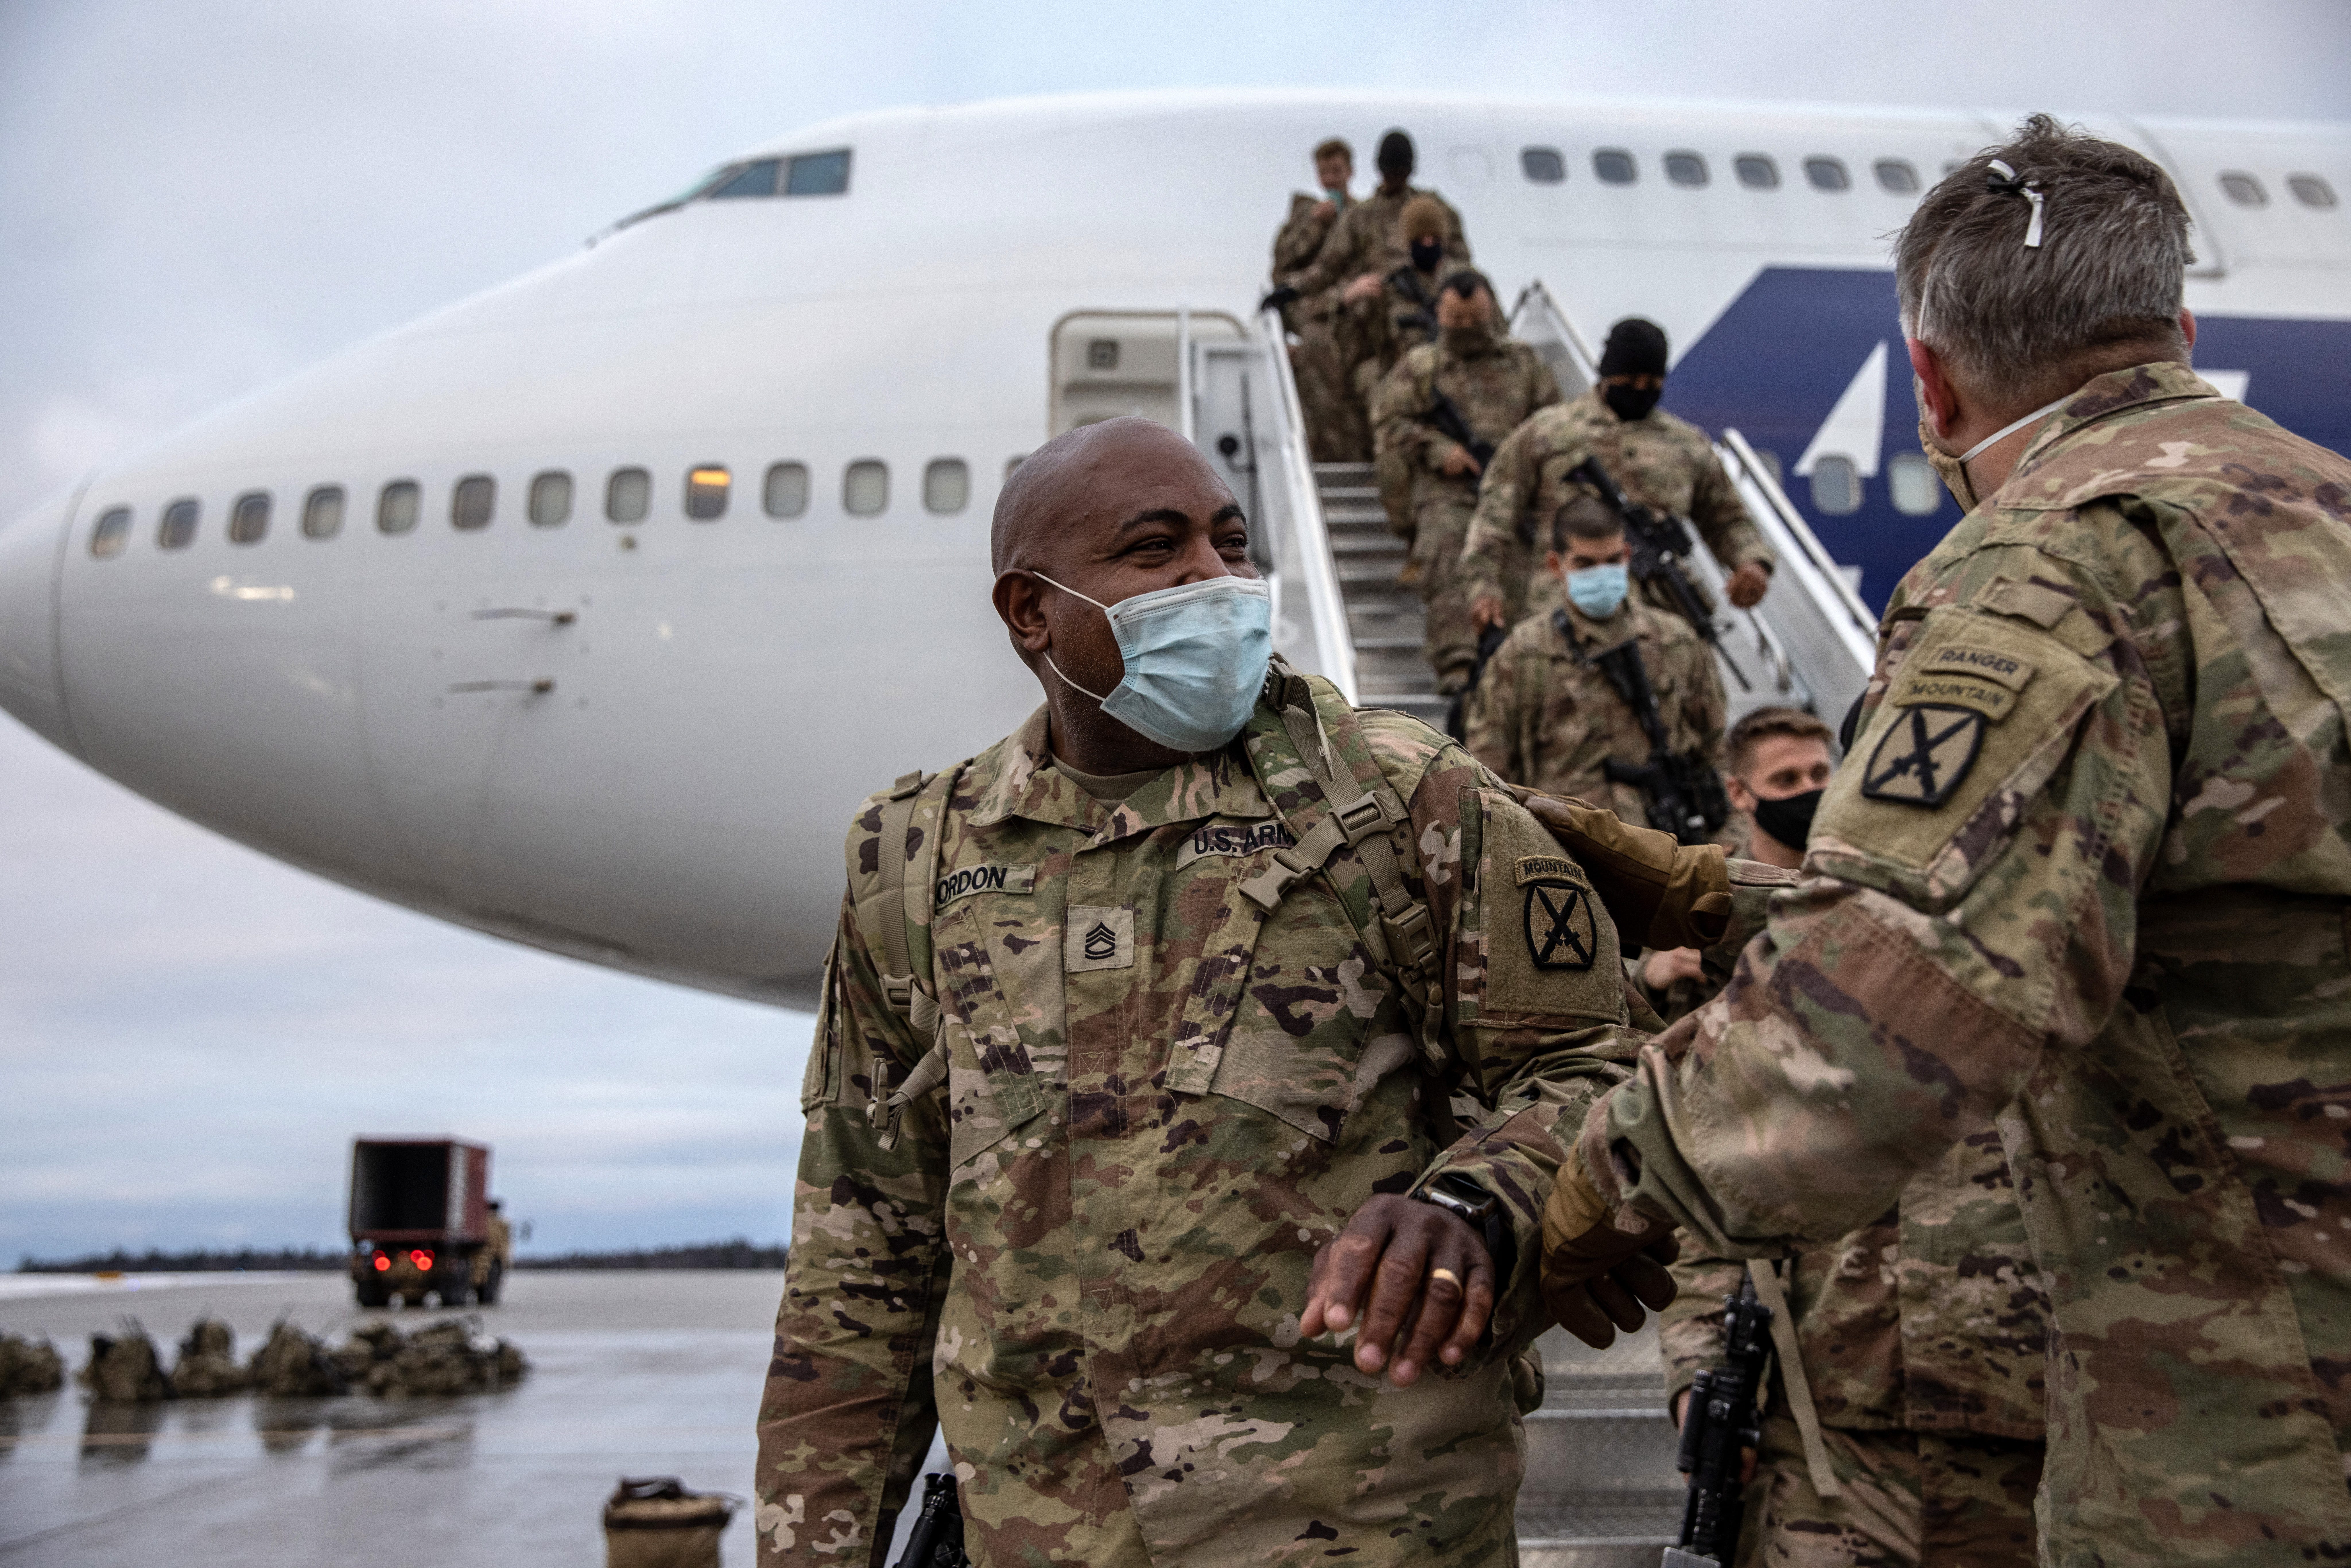 Army soldiers return from Afghanistan on Dec. 10, 2020, at Fort Drum, New York.